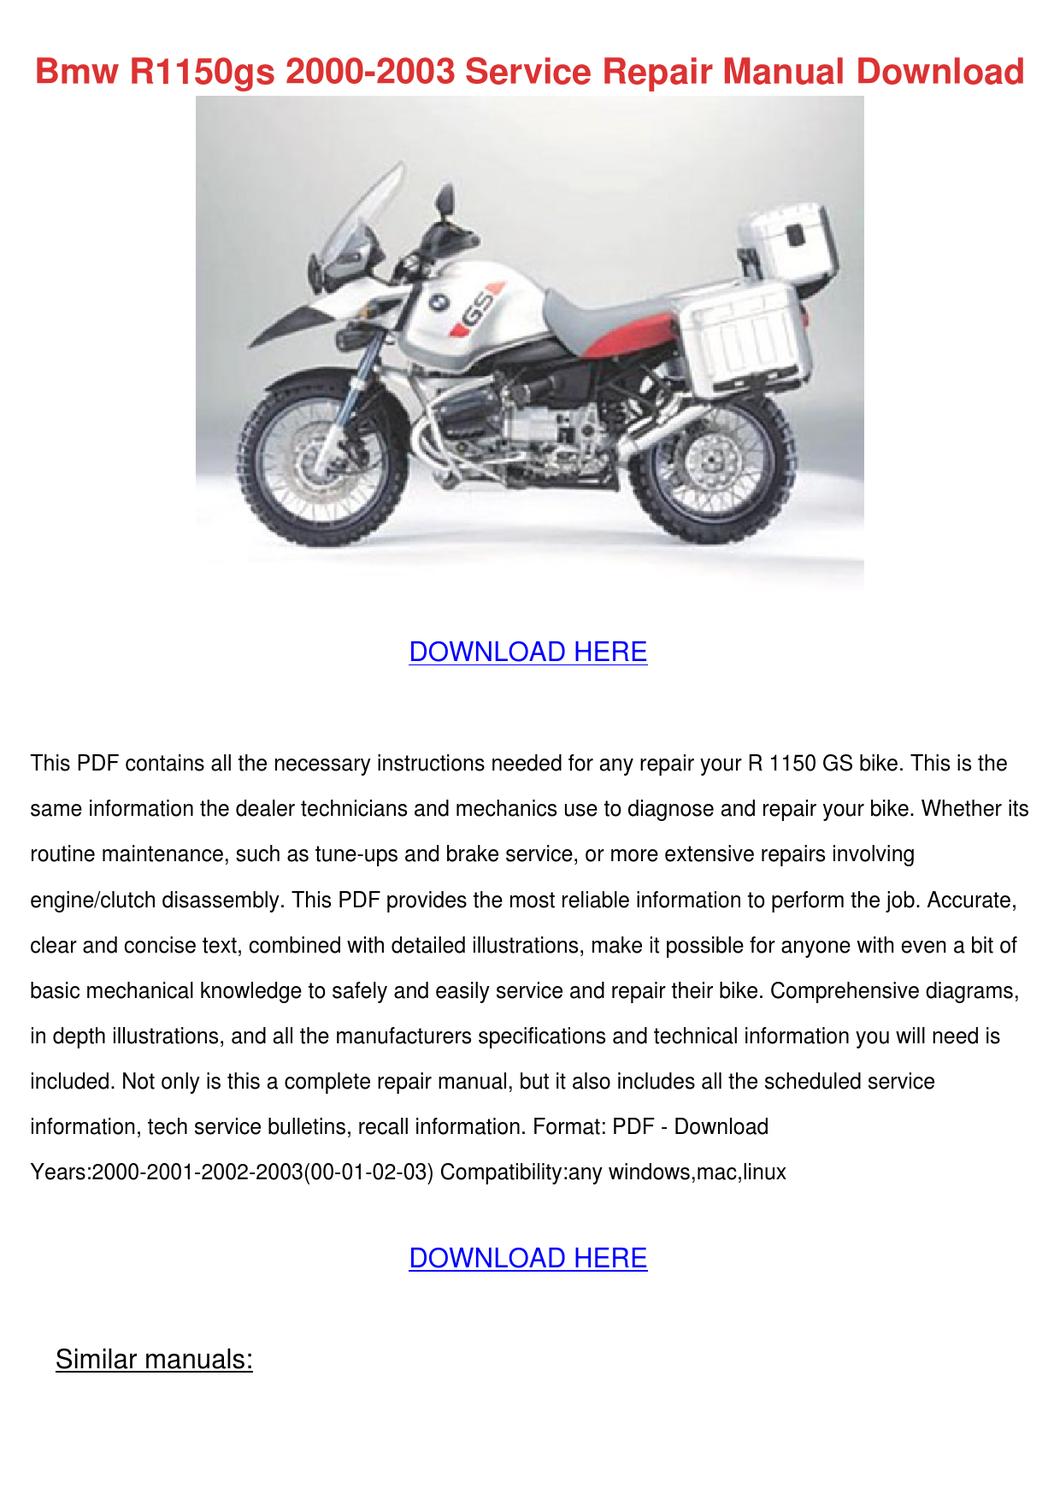 Bmw r1150gs owners manual download pdf